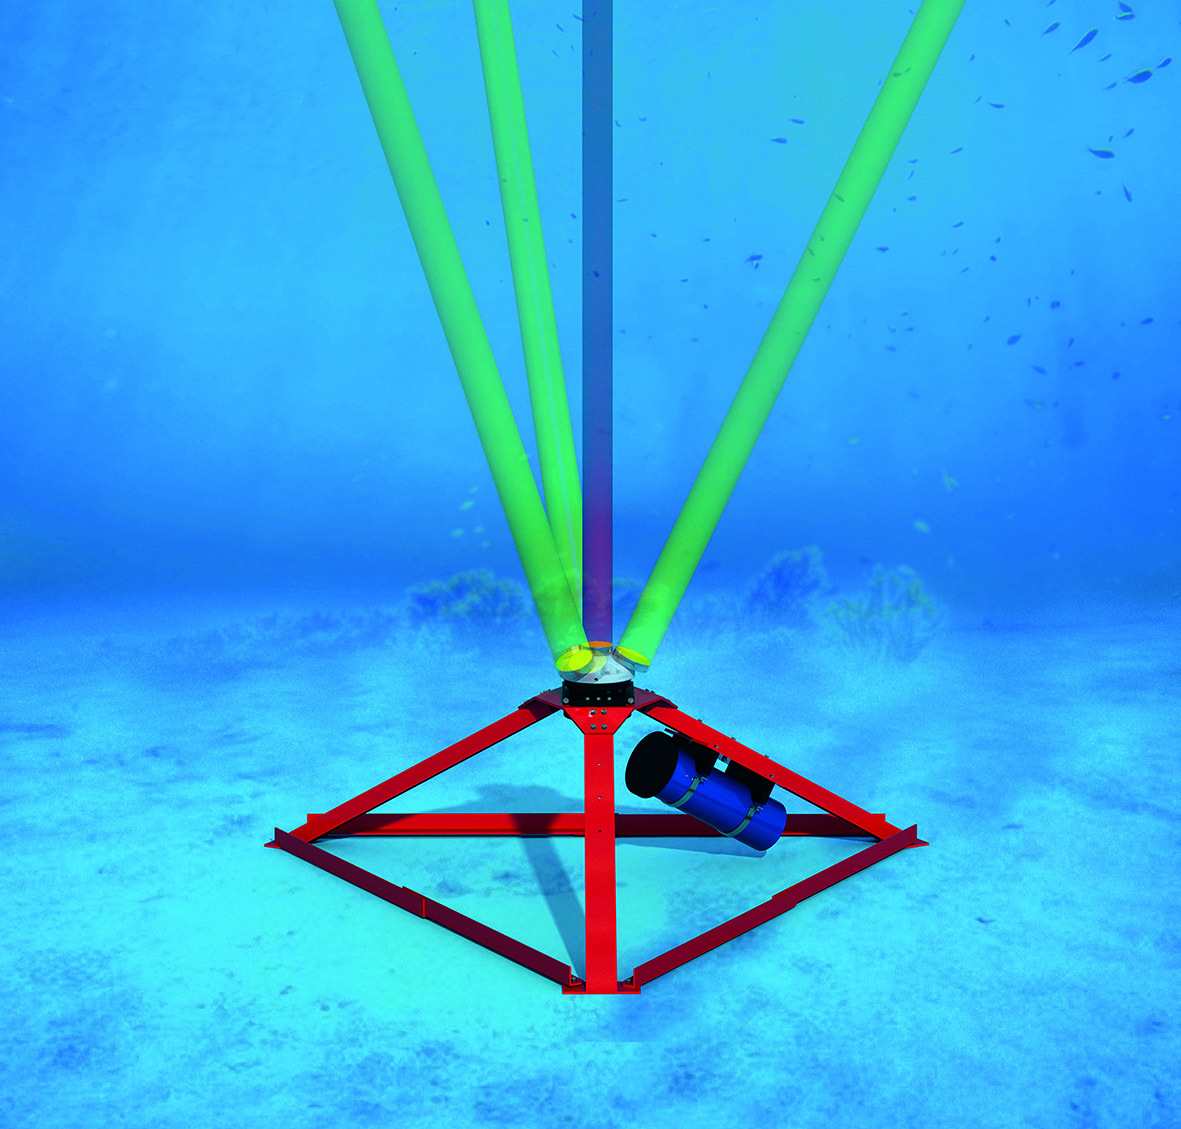 An AWAC ADCP from Nortek showing its projections of beams for measuring currents, waves and water level.